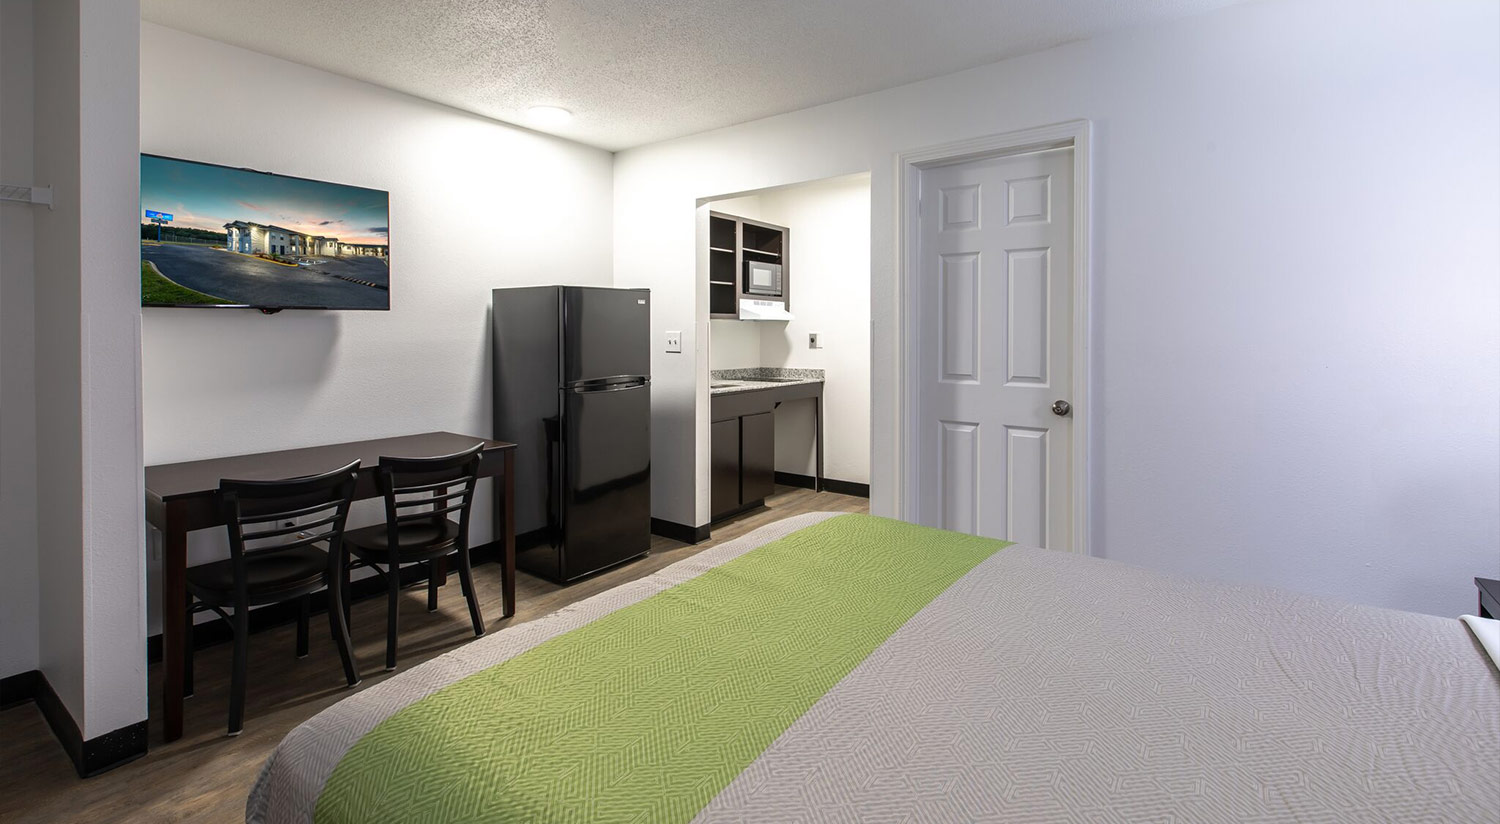 THE STUDIO 6 EXTENDED STAY HOTEL IN GREENVILLE, SC LOOKS FORWARD TO HOSTING YOU.  BOOK YOUR STAY TODAY!